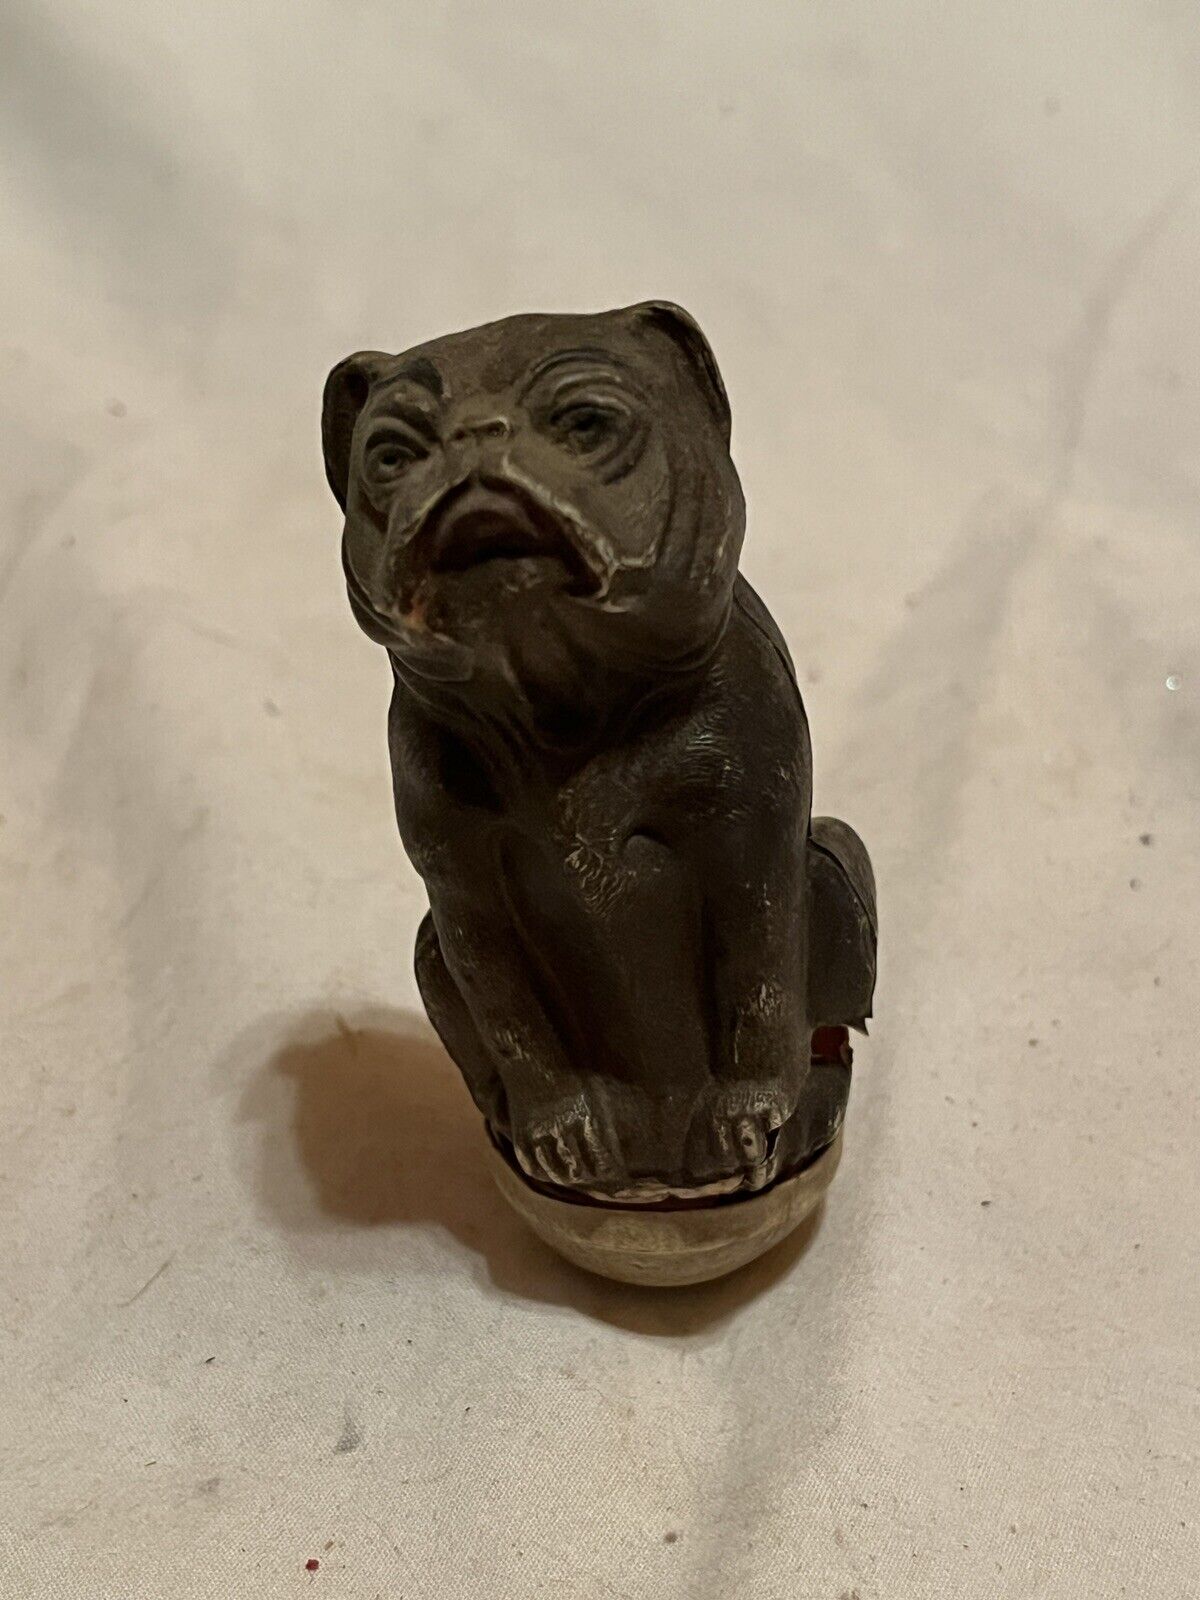 Vintage Antique Bulldog Candy Container - 1930s (439)